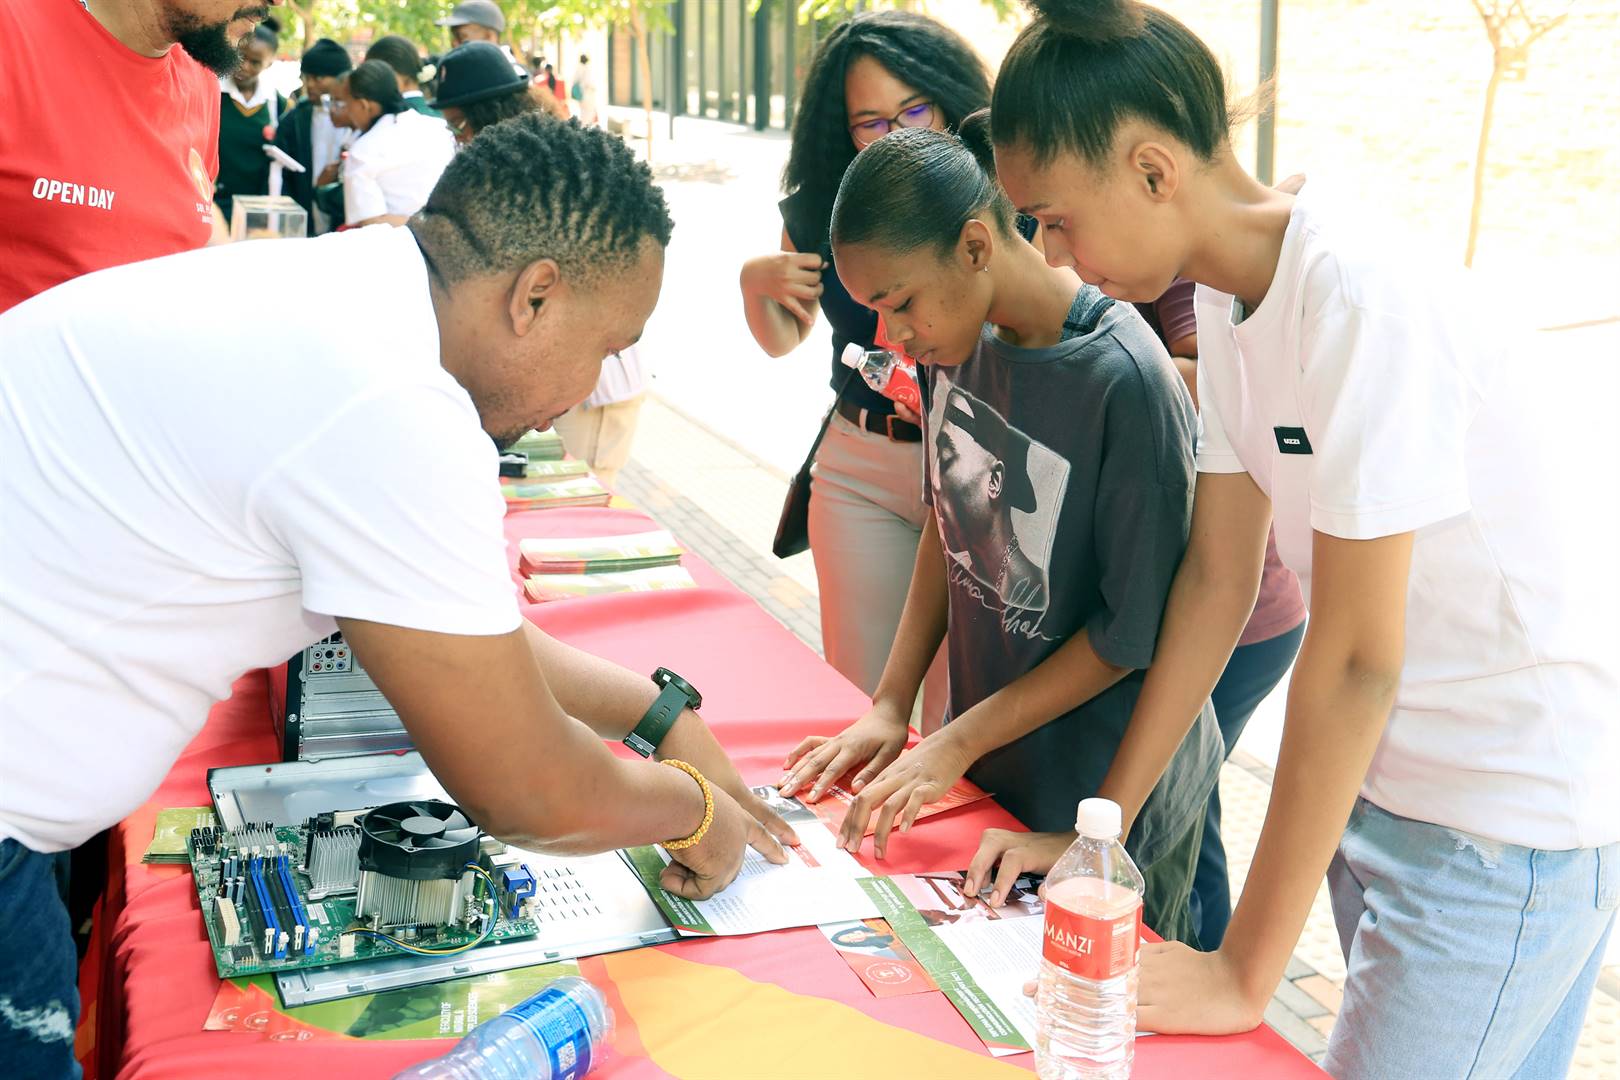 Northern Cape learners attending the open day of the Sol Plaatje University on 6 April.